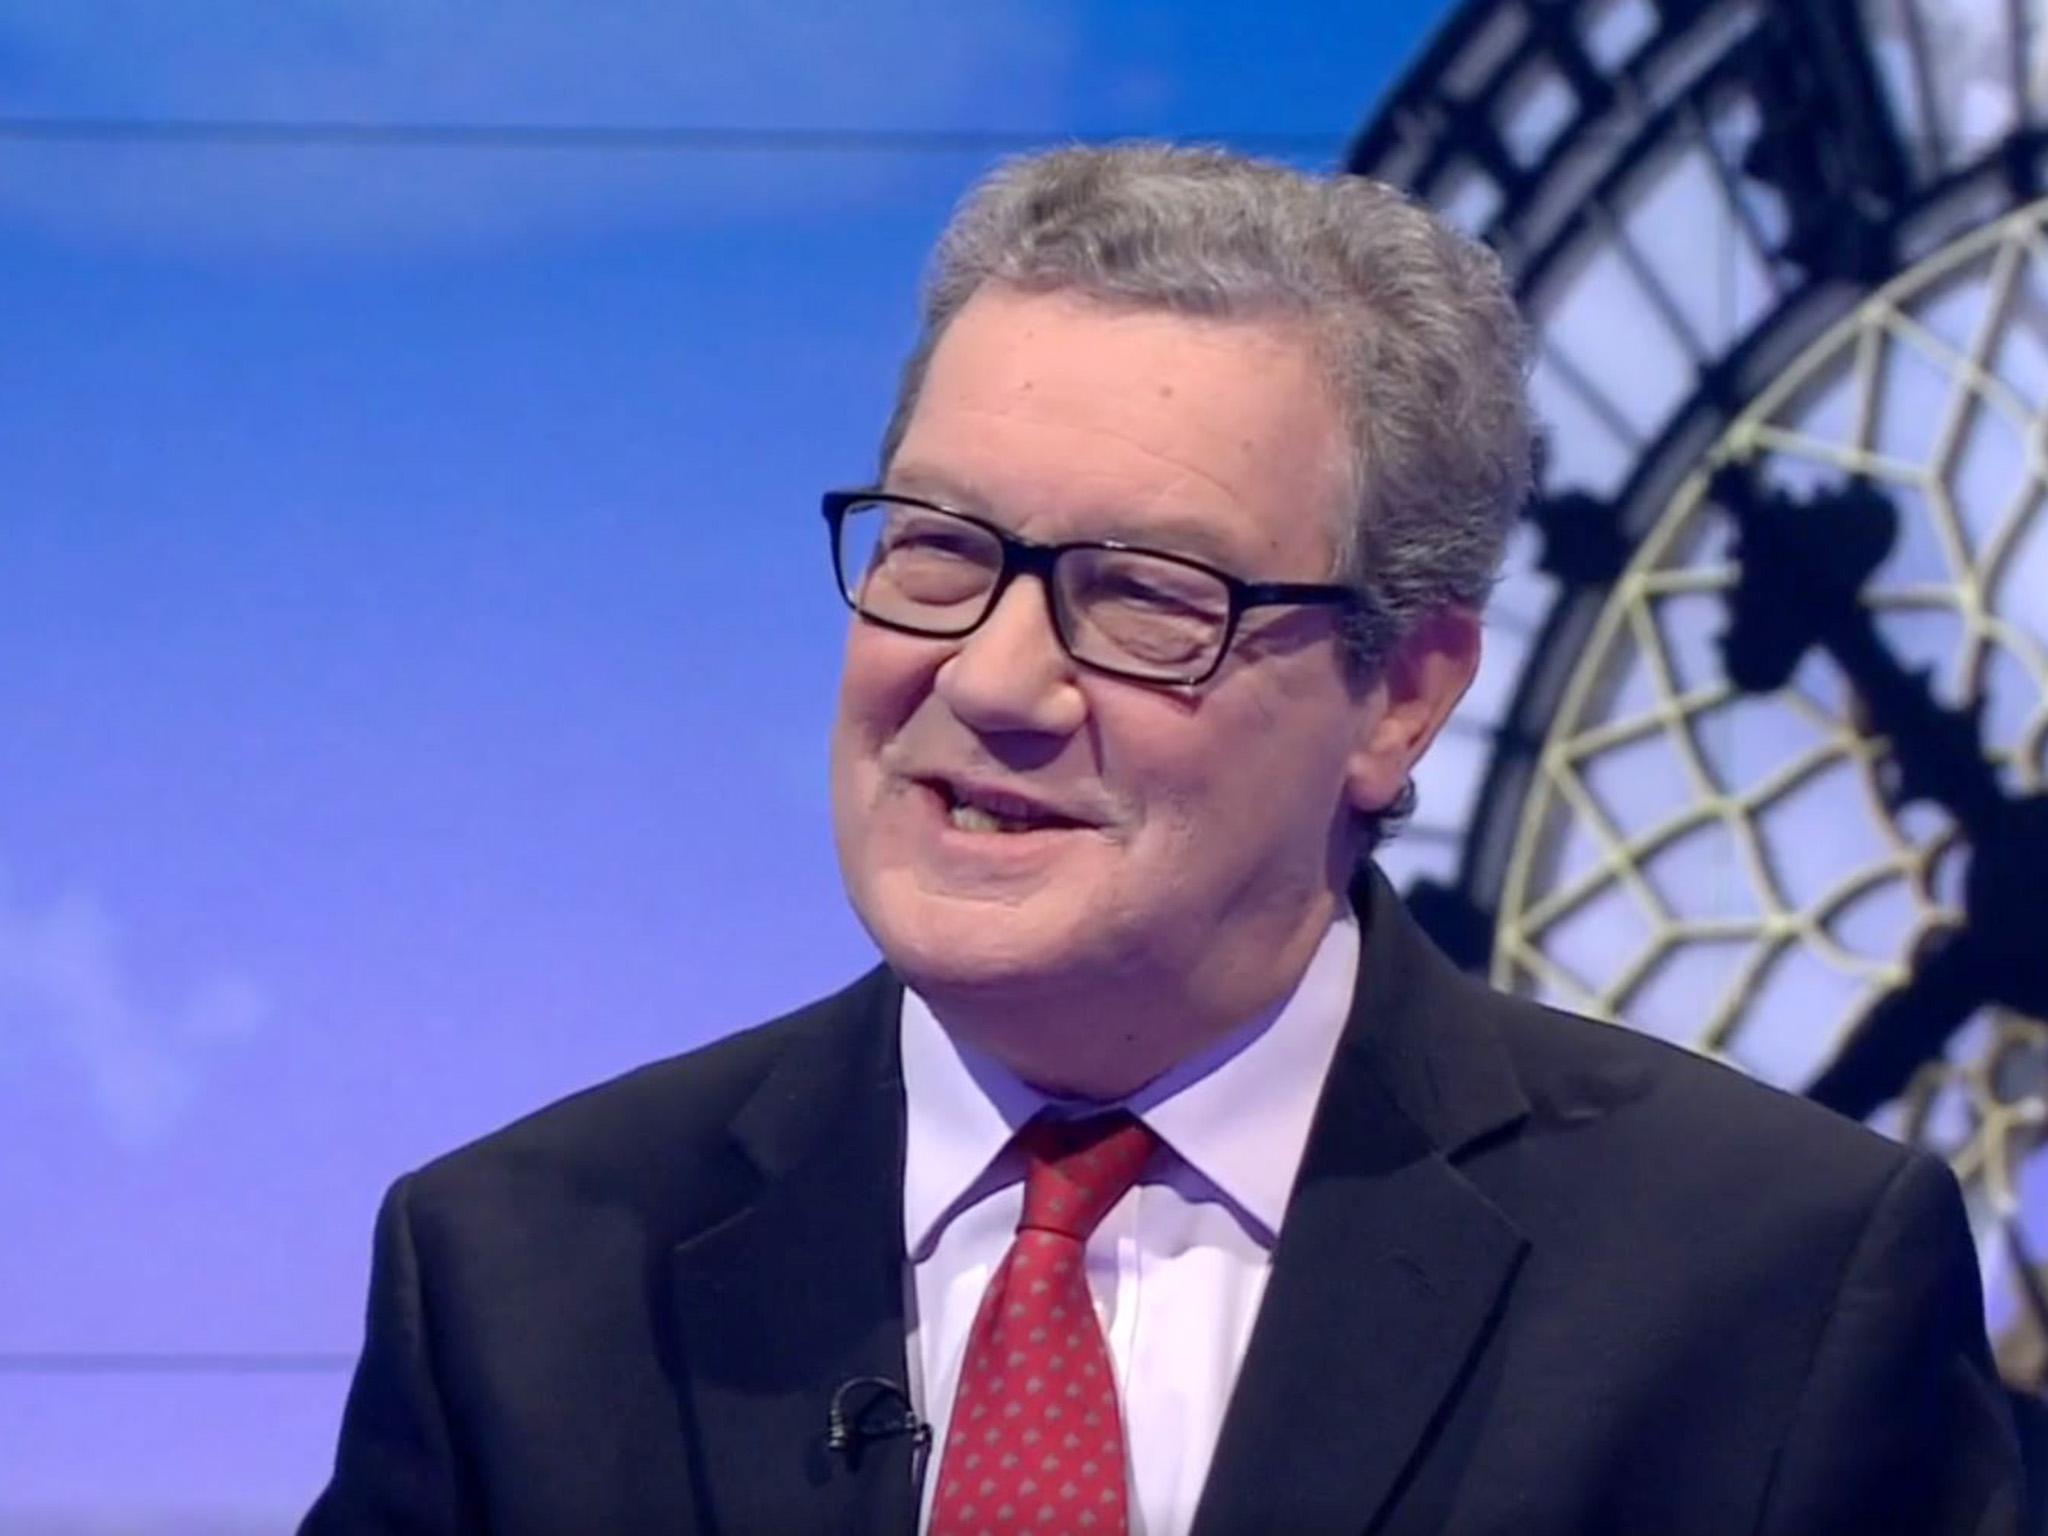 Alexander Downer, the Australian High Commissioner to the UK, spoke to the Sunday Politics programme